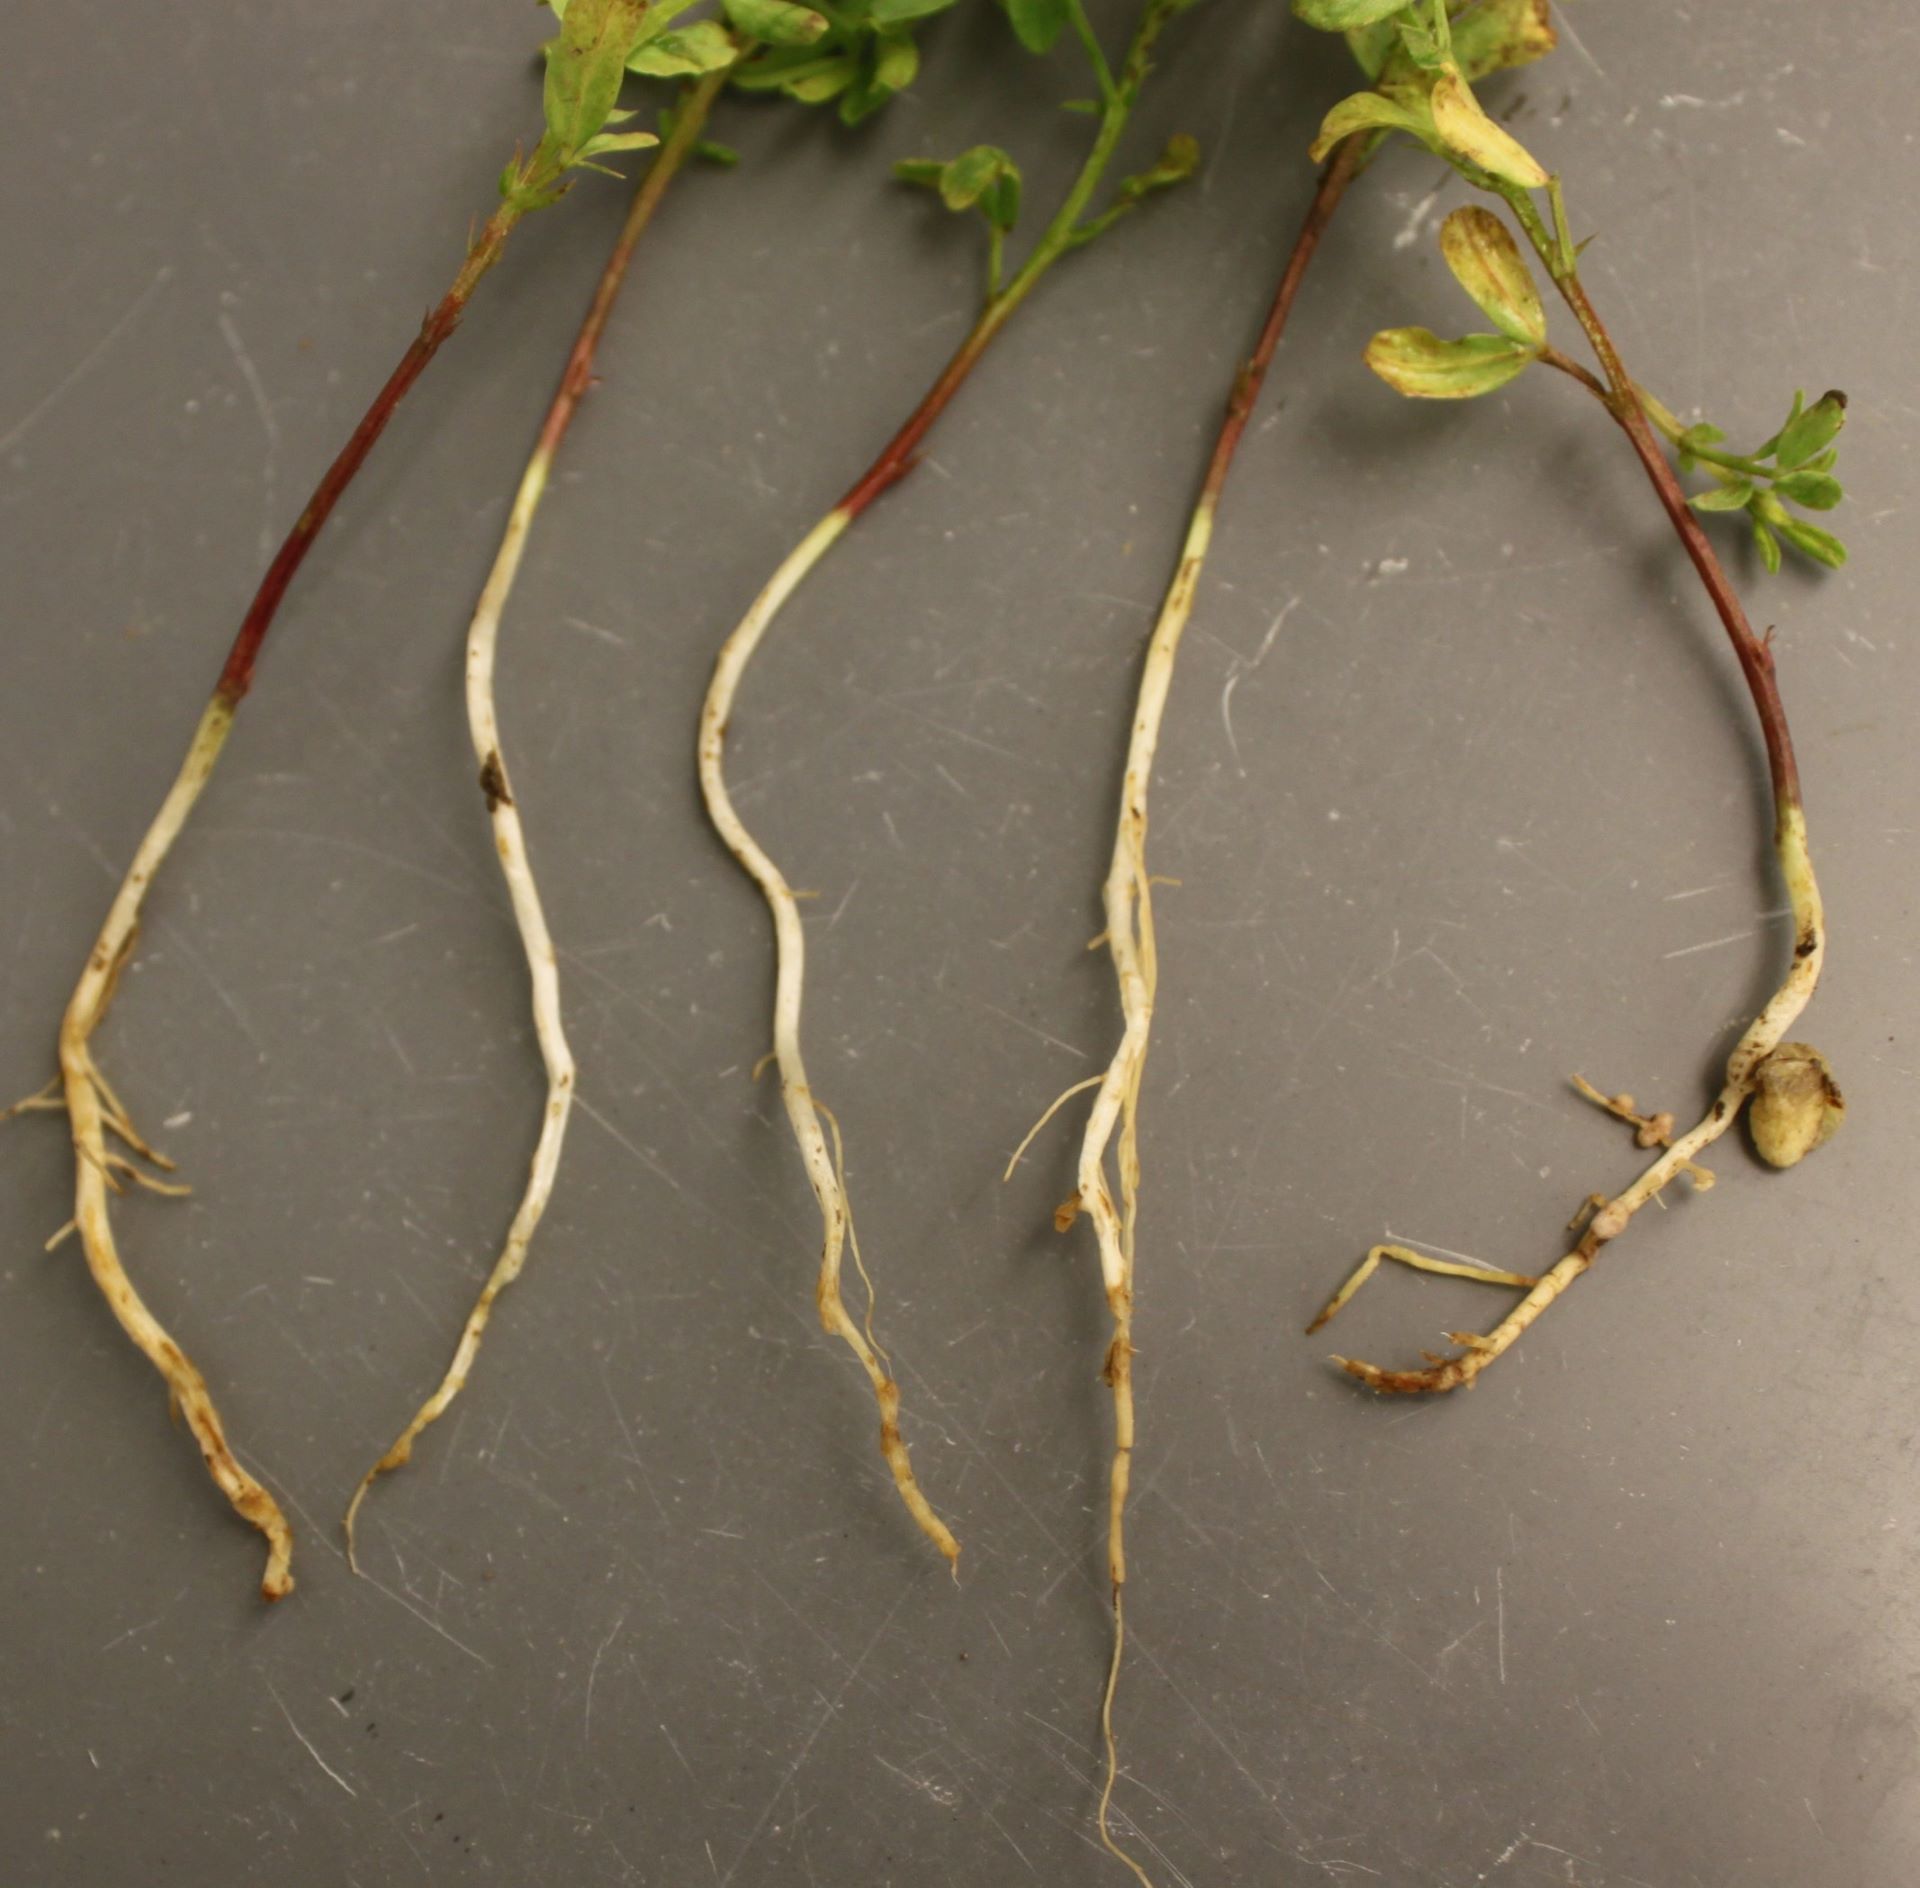 Pythium root rot on lentil, resulting in much less secondary roots. The primary root shows broiwn, reddish, and black lesions where infected.